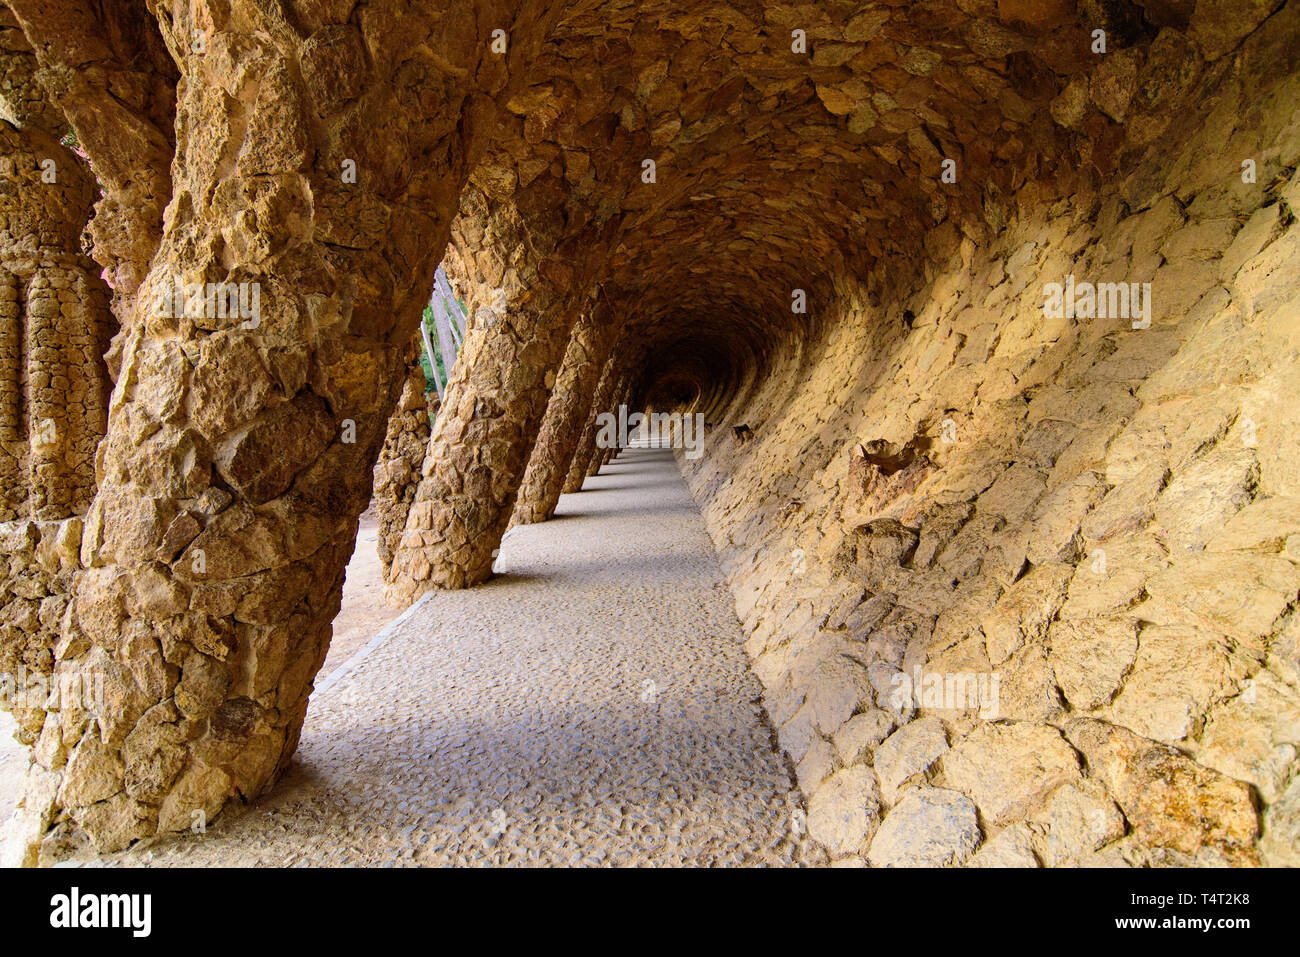 Portico of the Washerwoman in Park Guell in Barcelona, Spain Stock Photo